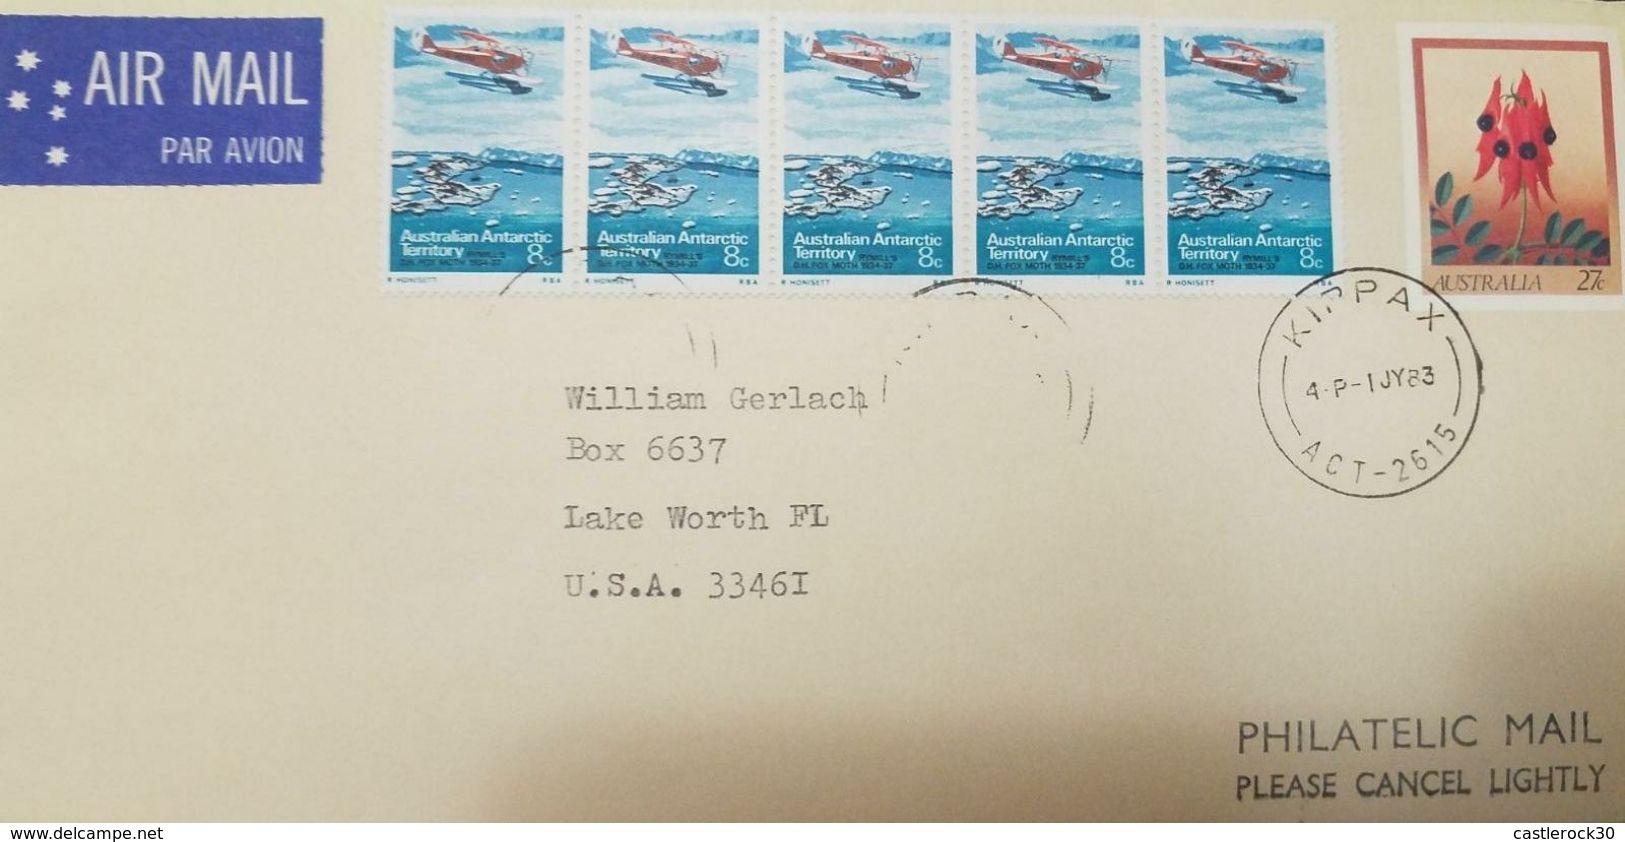 L) 1983 AUSTRALIAN ANTARCTIC TERRITORY, AIRPLANE, BLUE, 8C, ICE, FLOWER, NATURE, 27C, CIRCULATED COVER FROM AUSTRALIA TO - Lettres & Documents